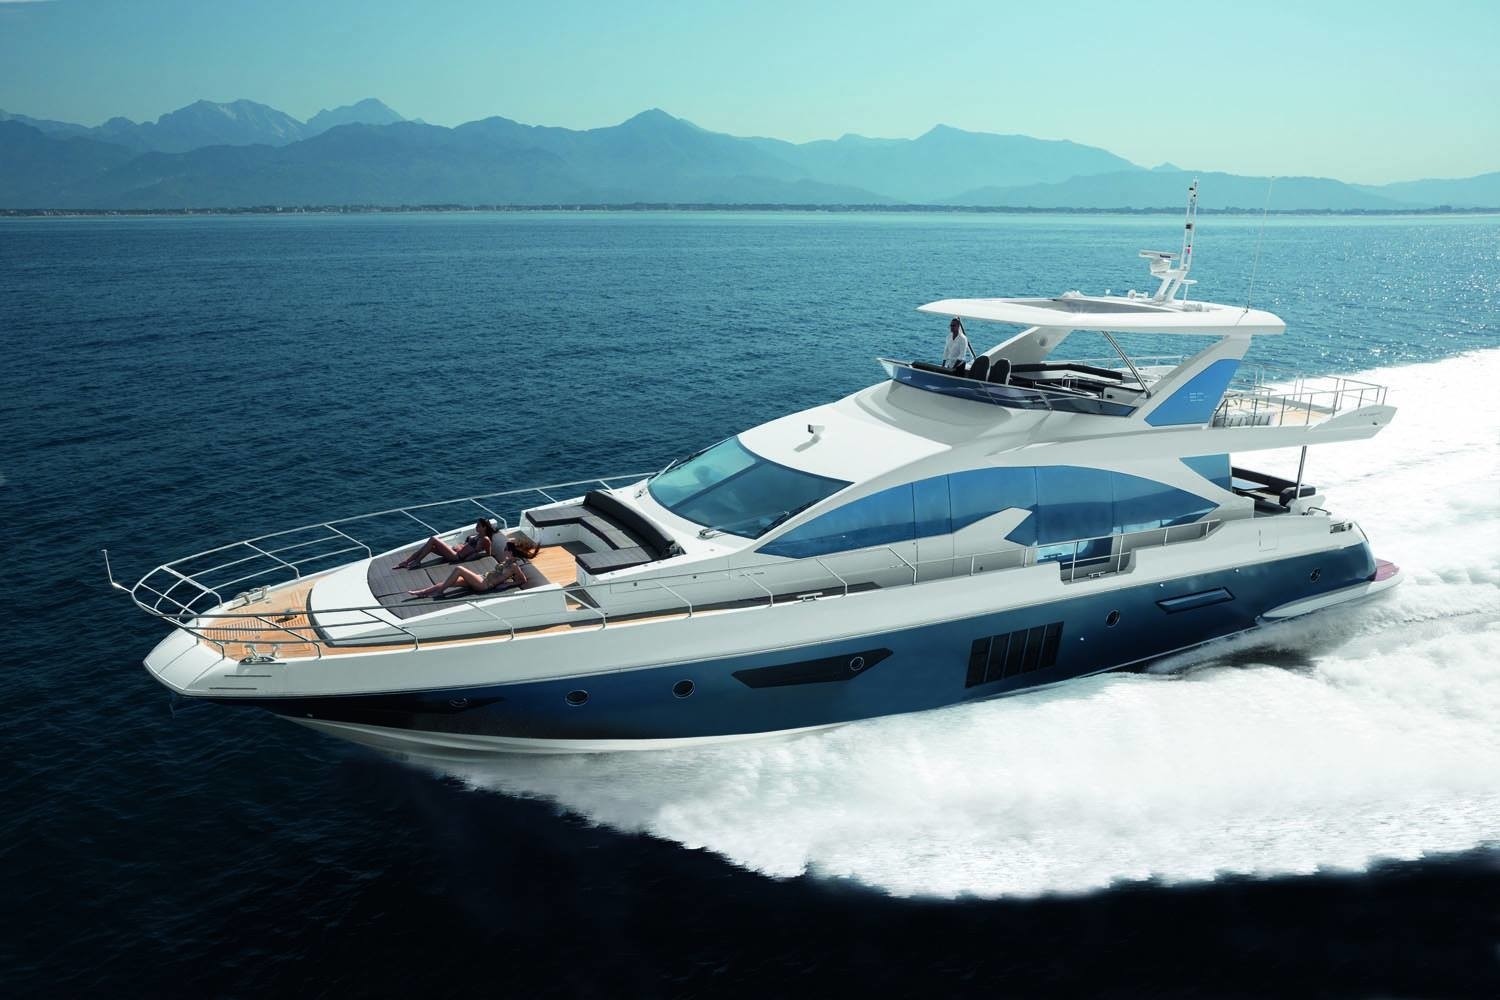 The 25m Yacht NORTH STAR